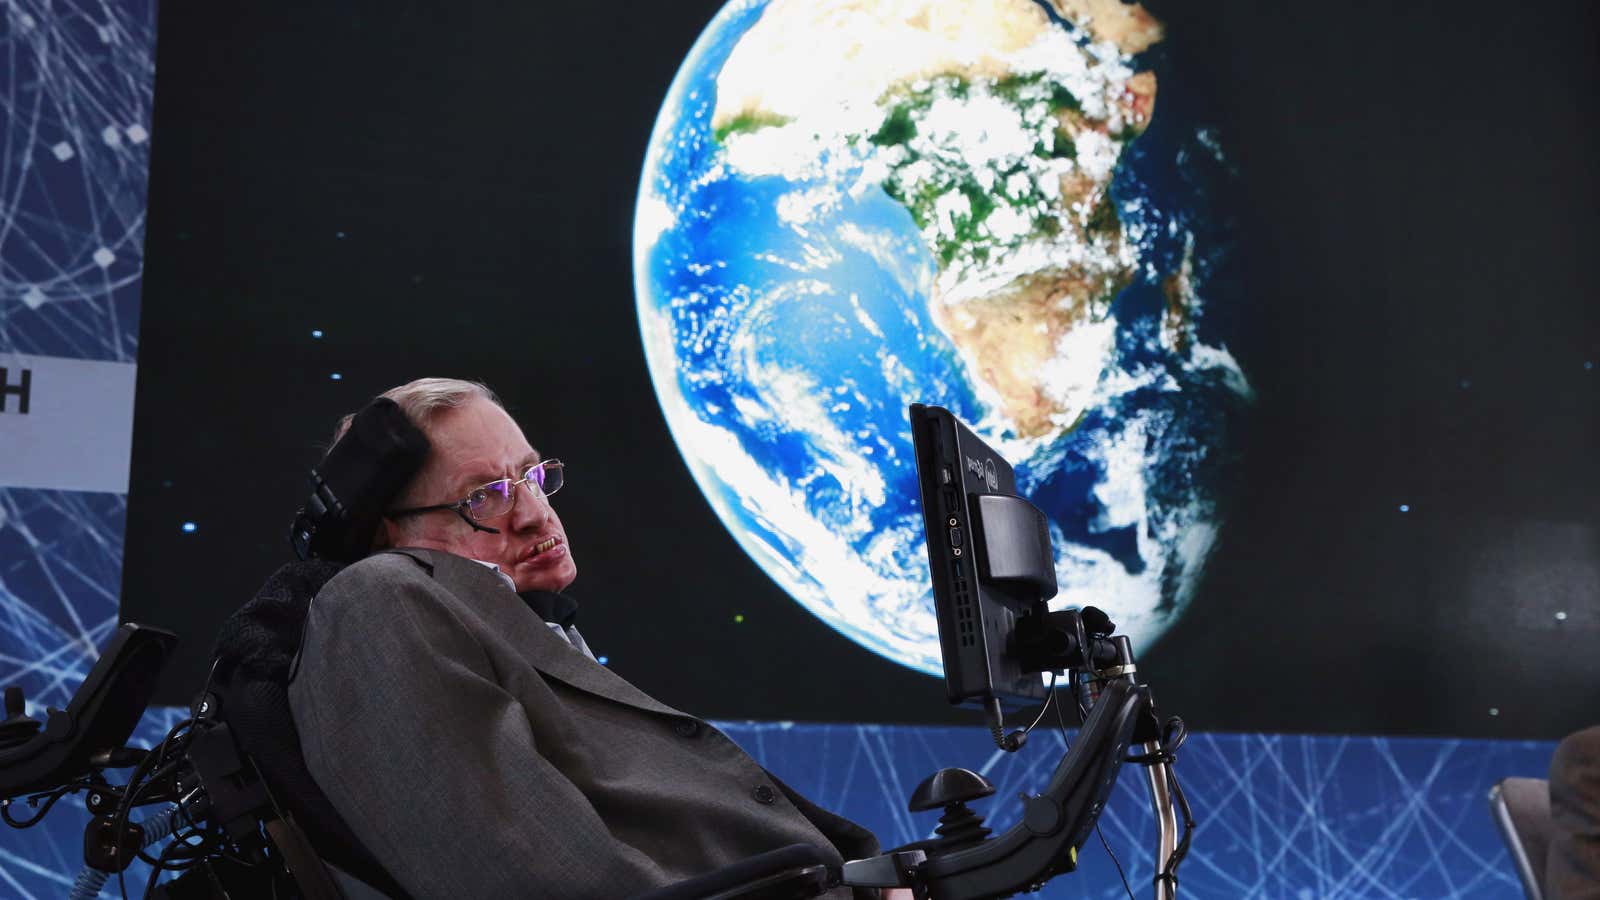 Hawking went as far as predicting that future developments in AI “could spell the end of the human race.”